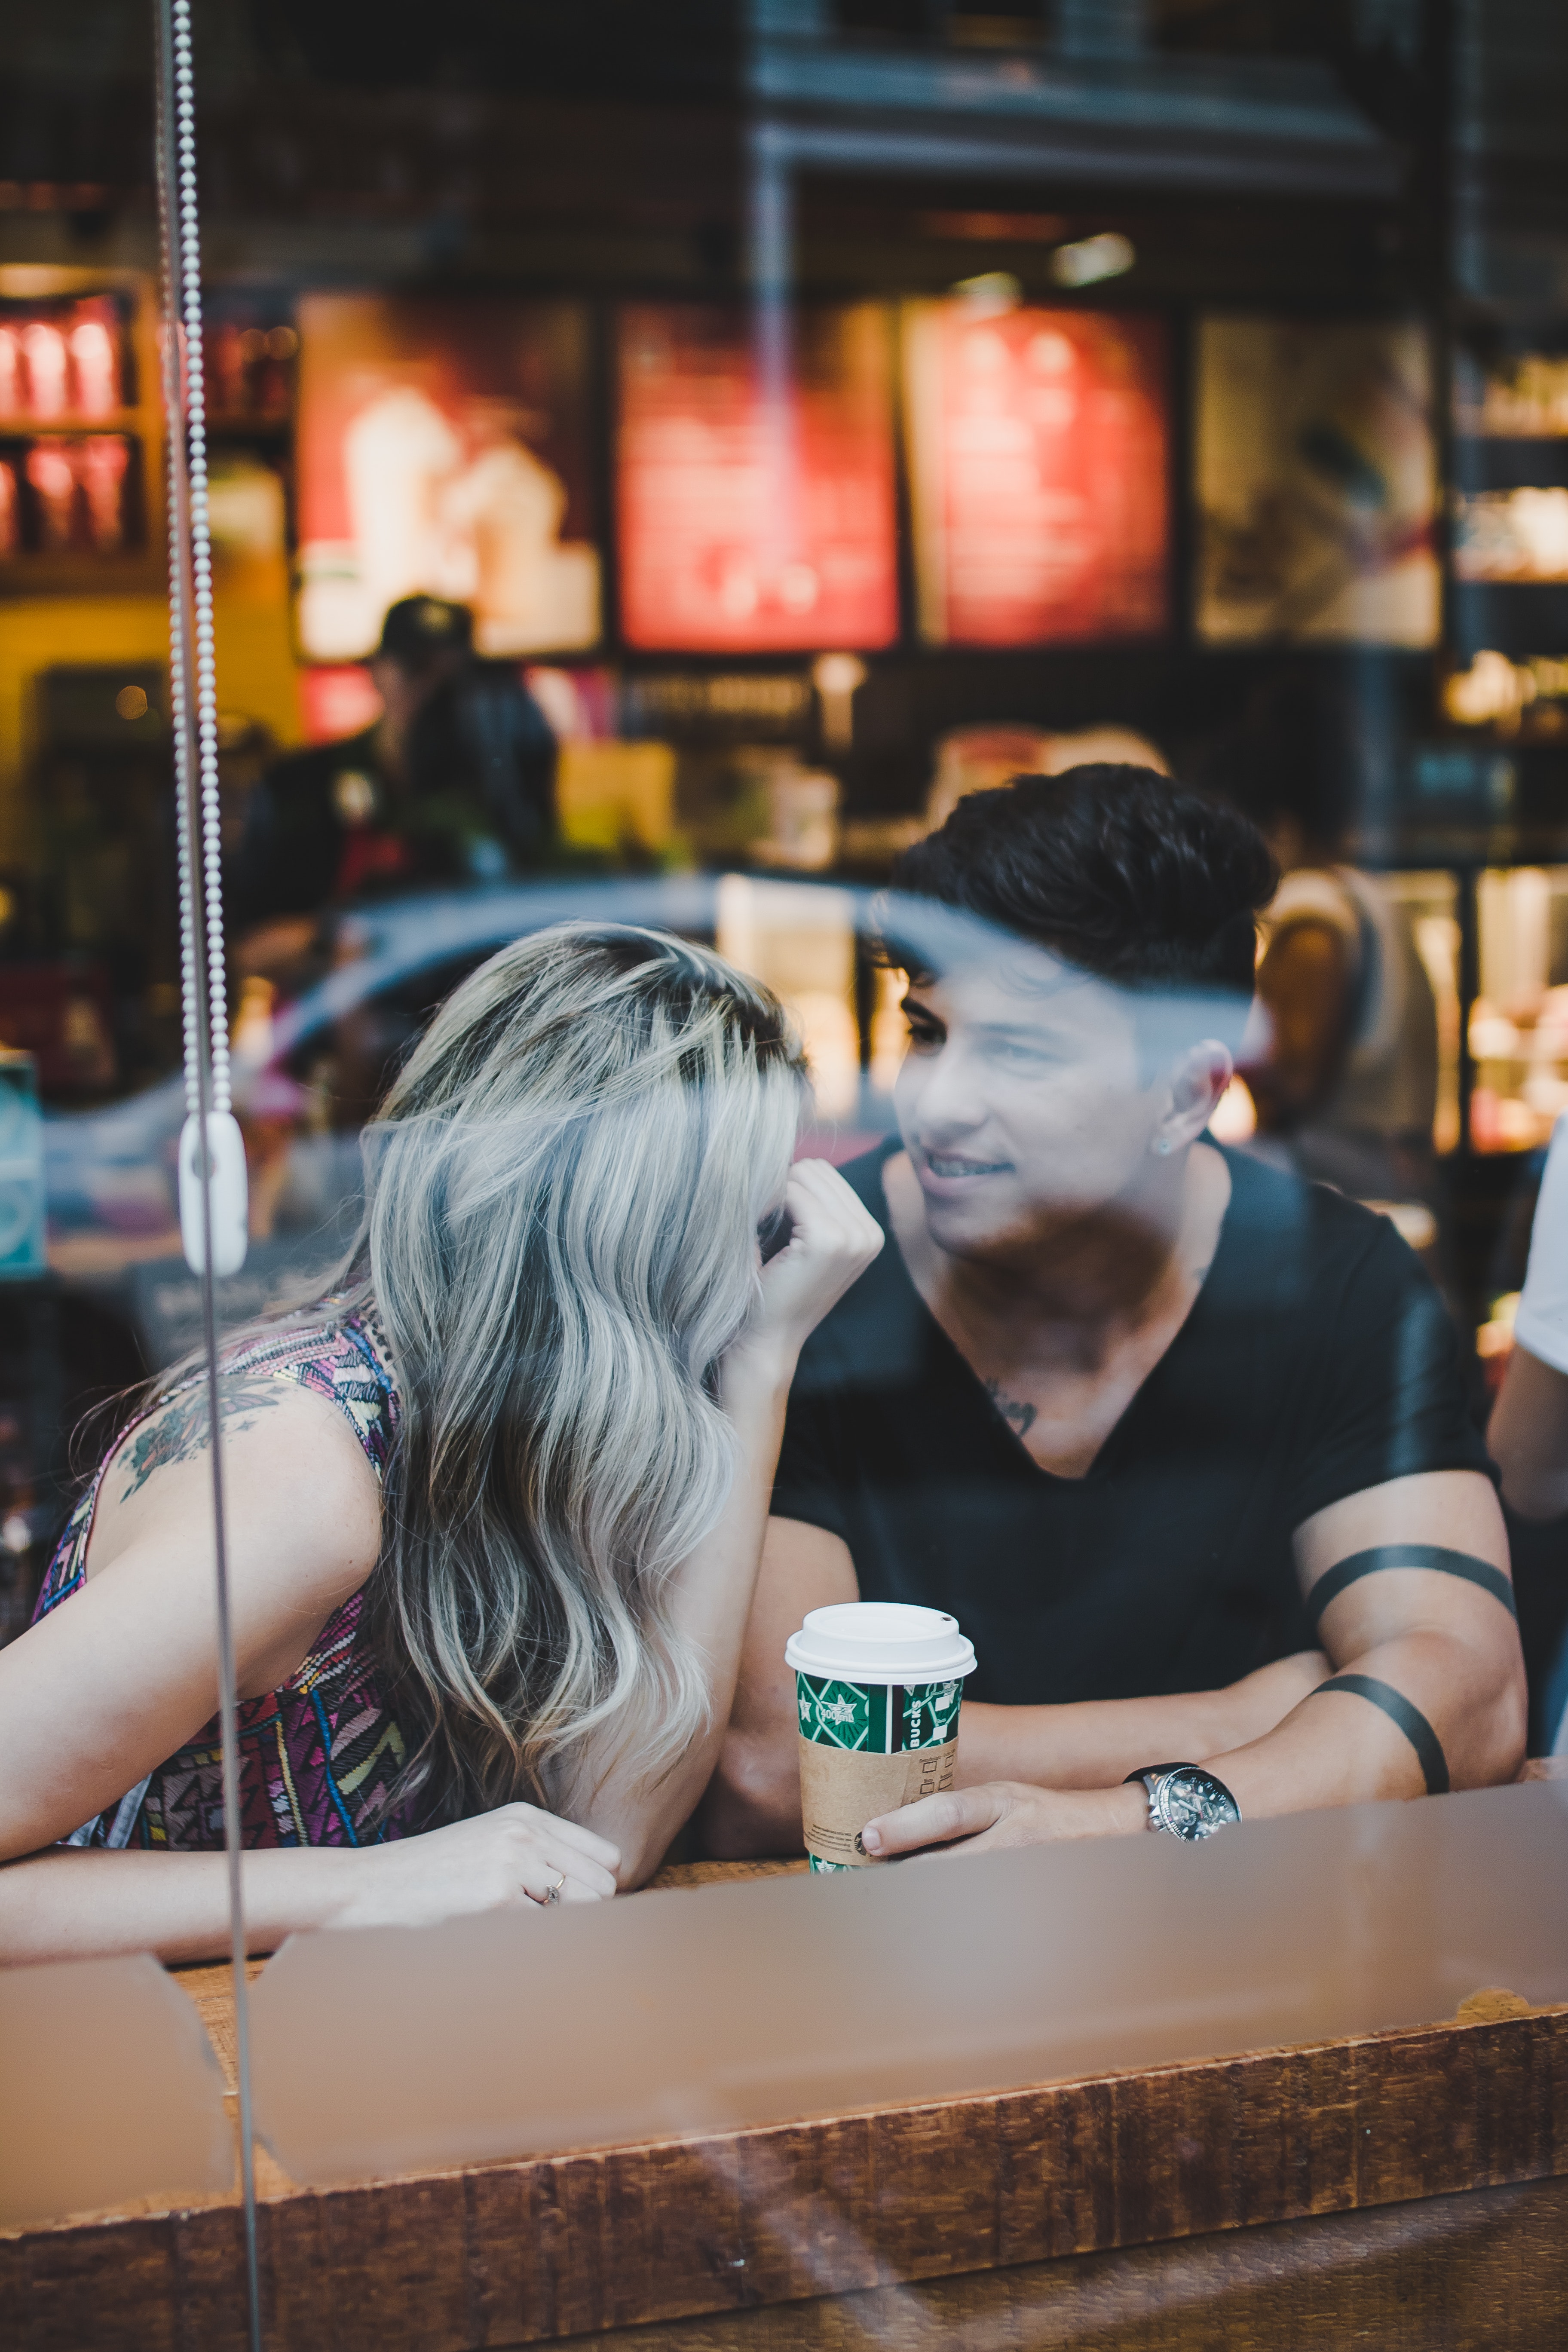 A couple talking in a coffee shop. | Source: Pexels